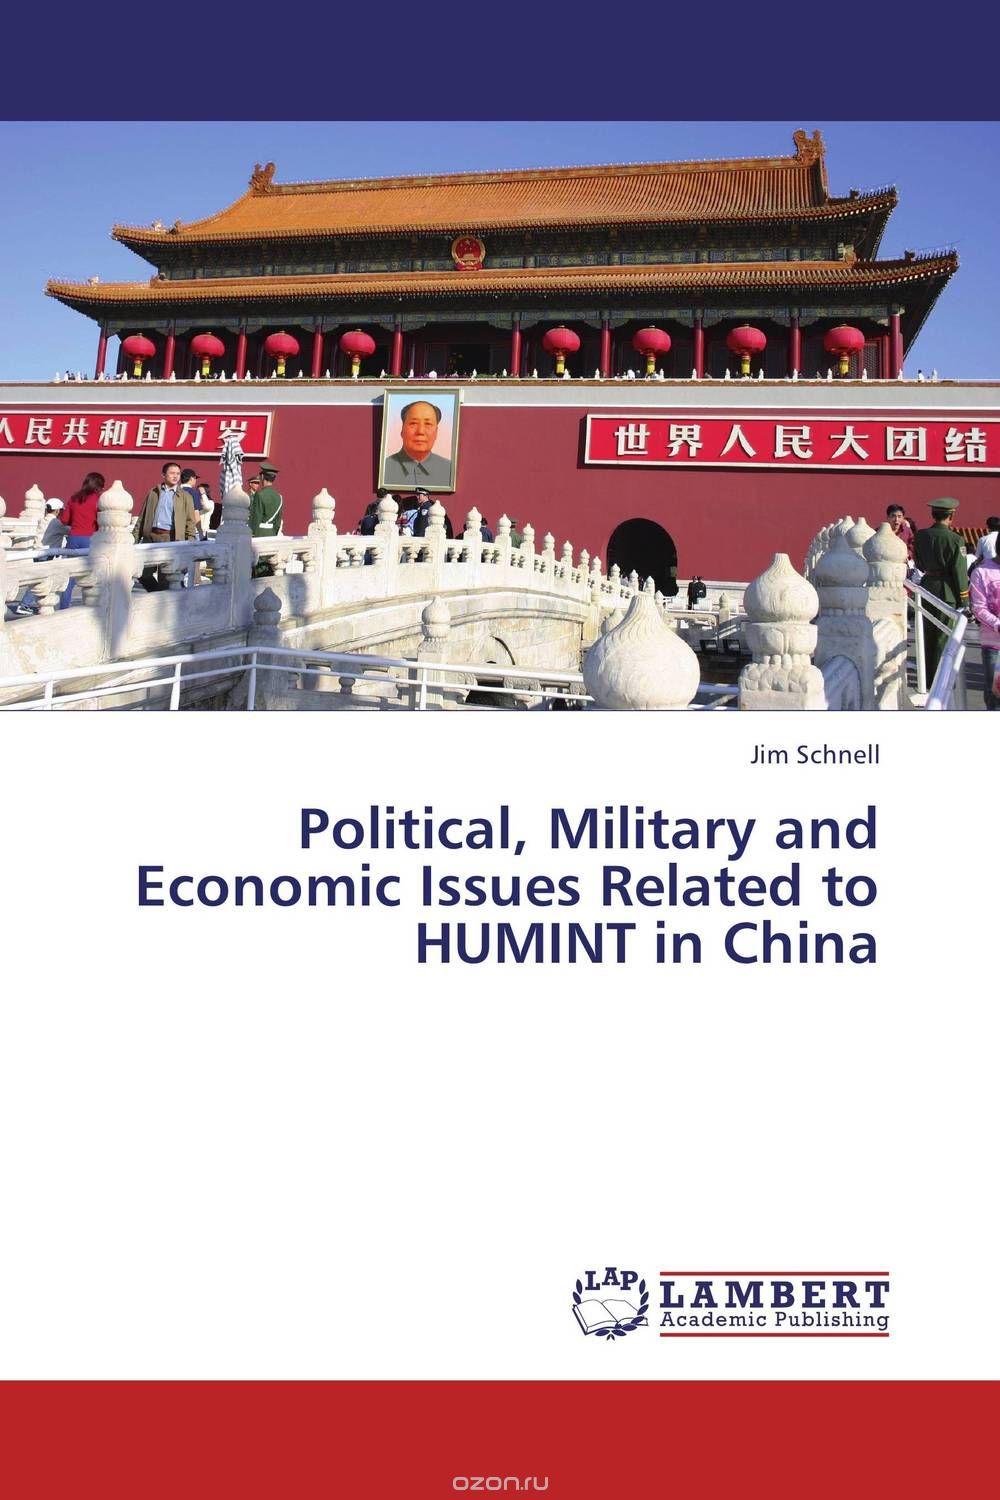 Скачать книгу "Political, Military and Economic Issues Related to HUMINT in China"